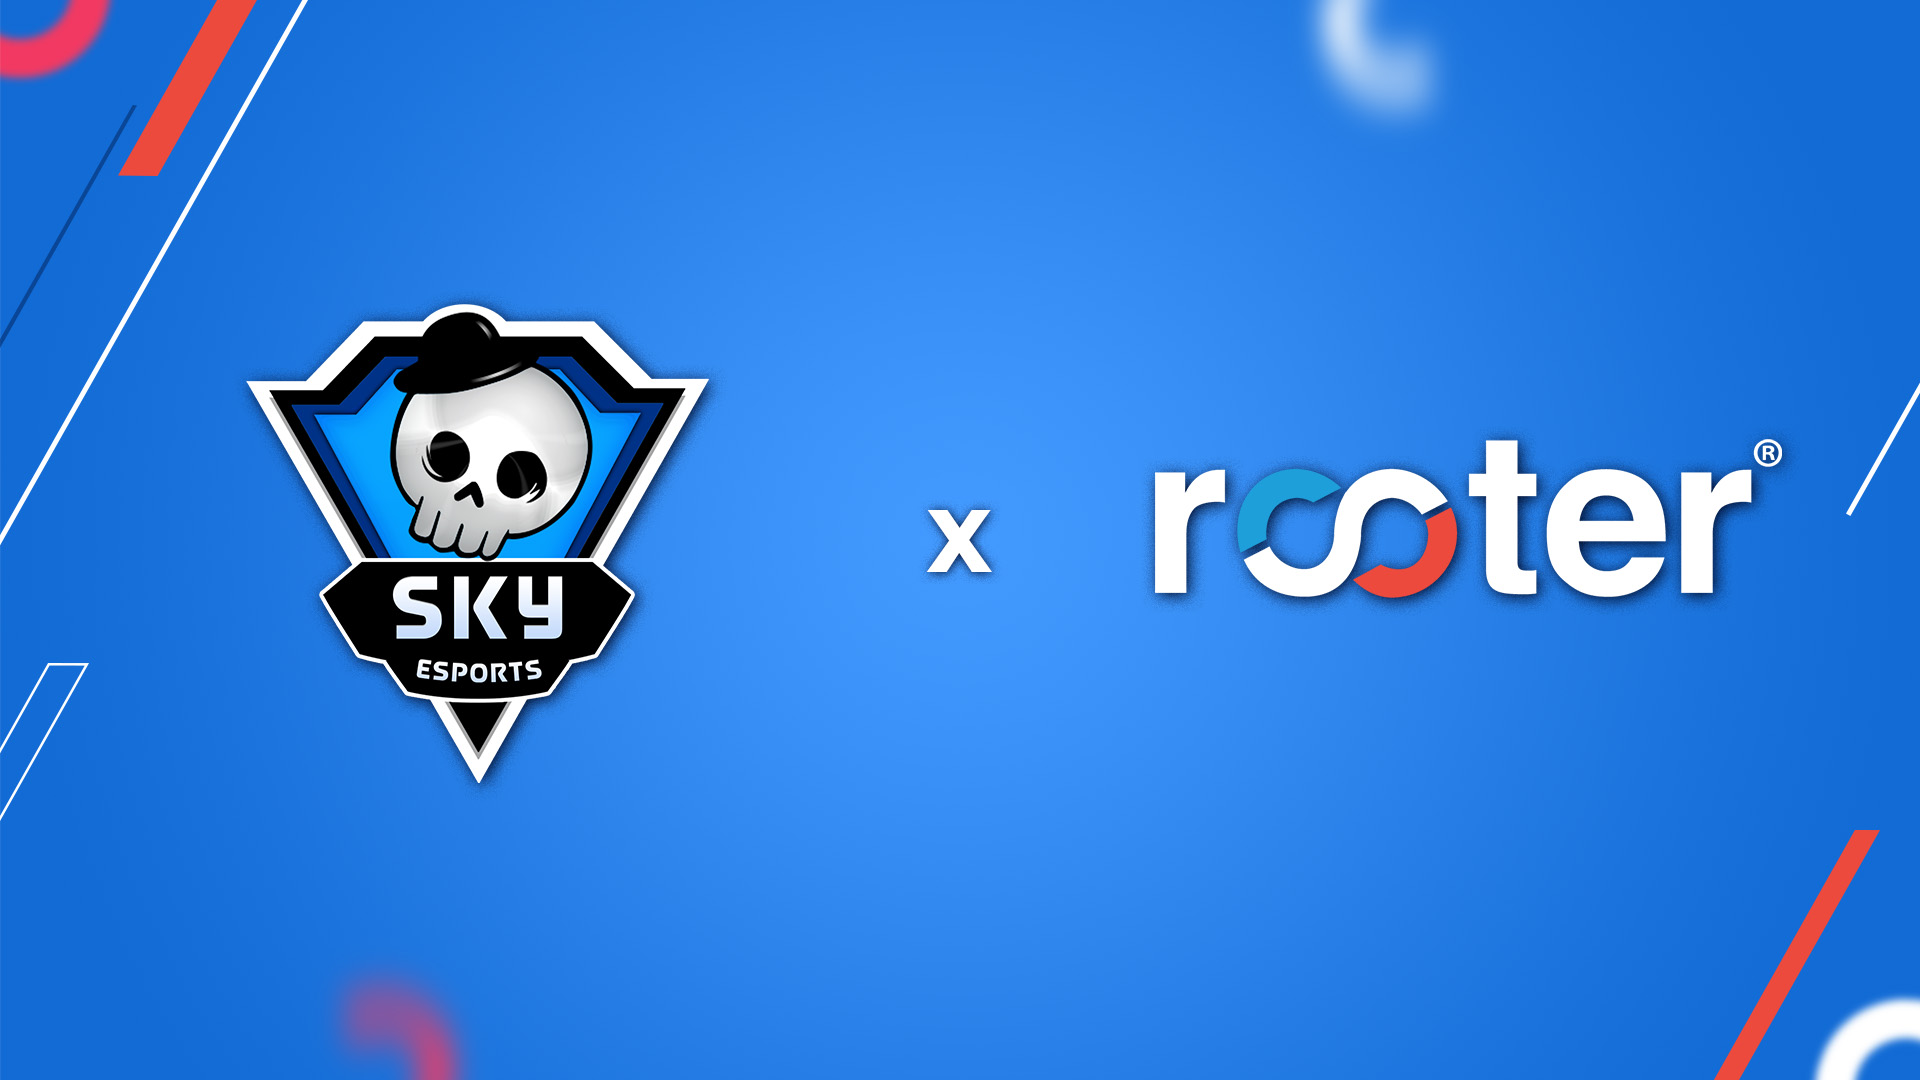 Rooter x Skyesports Rooter bags media rights deal